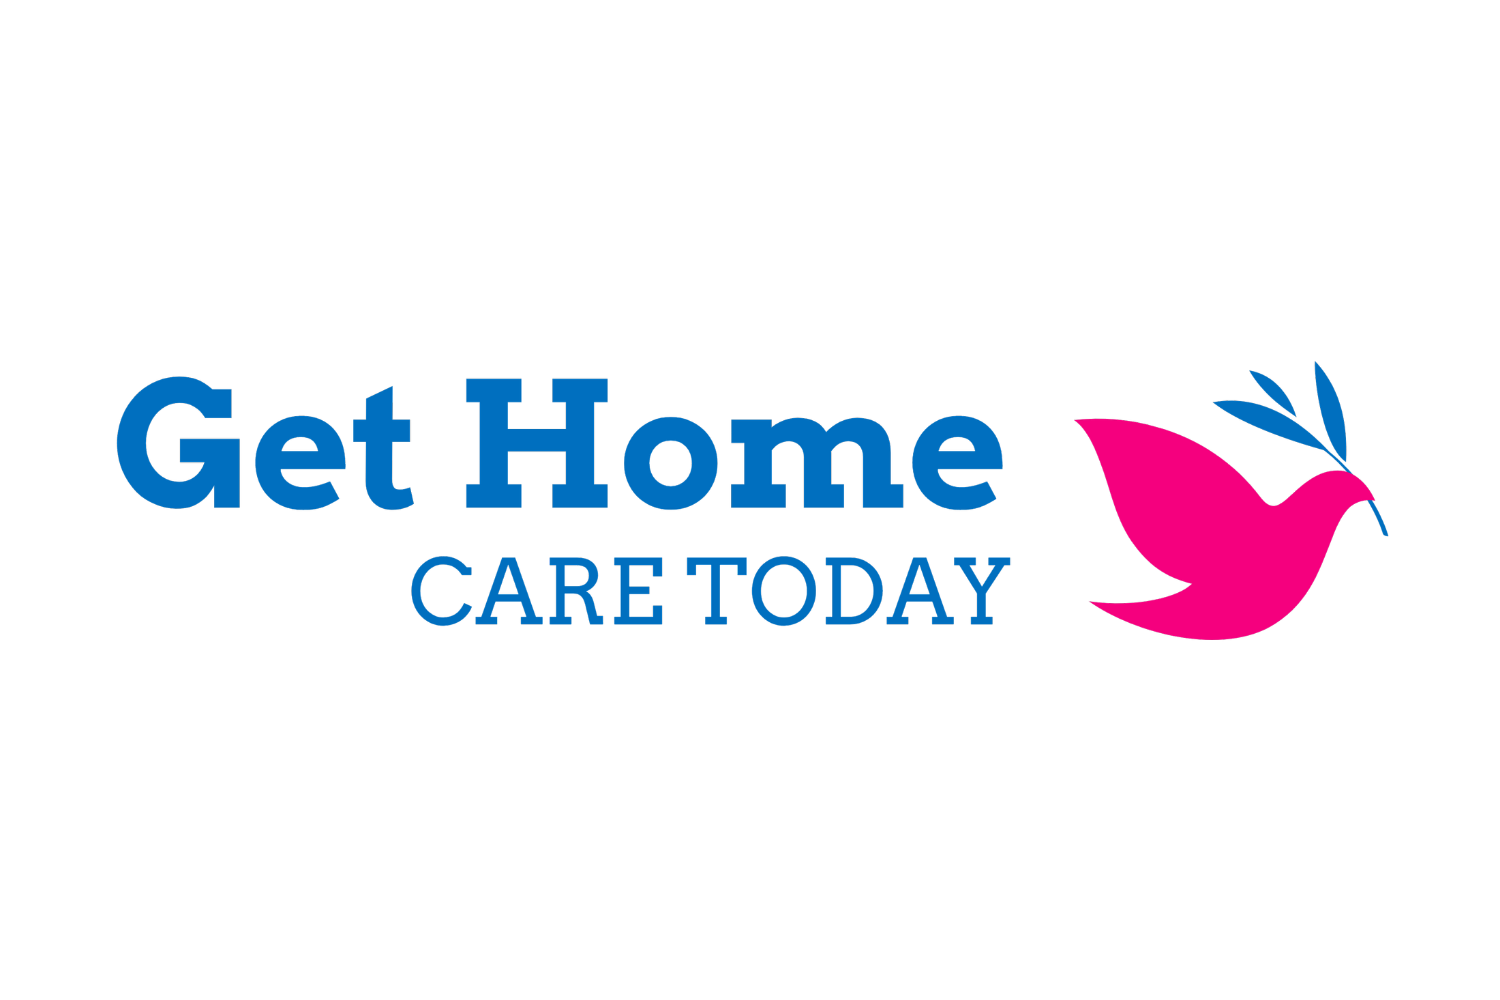 Get Home Care Today - Straight Logo - 1500x1000 px